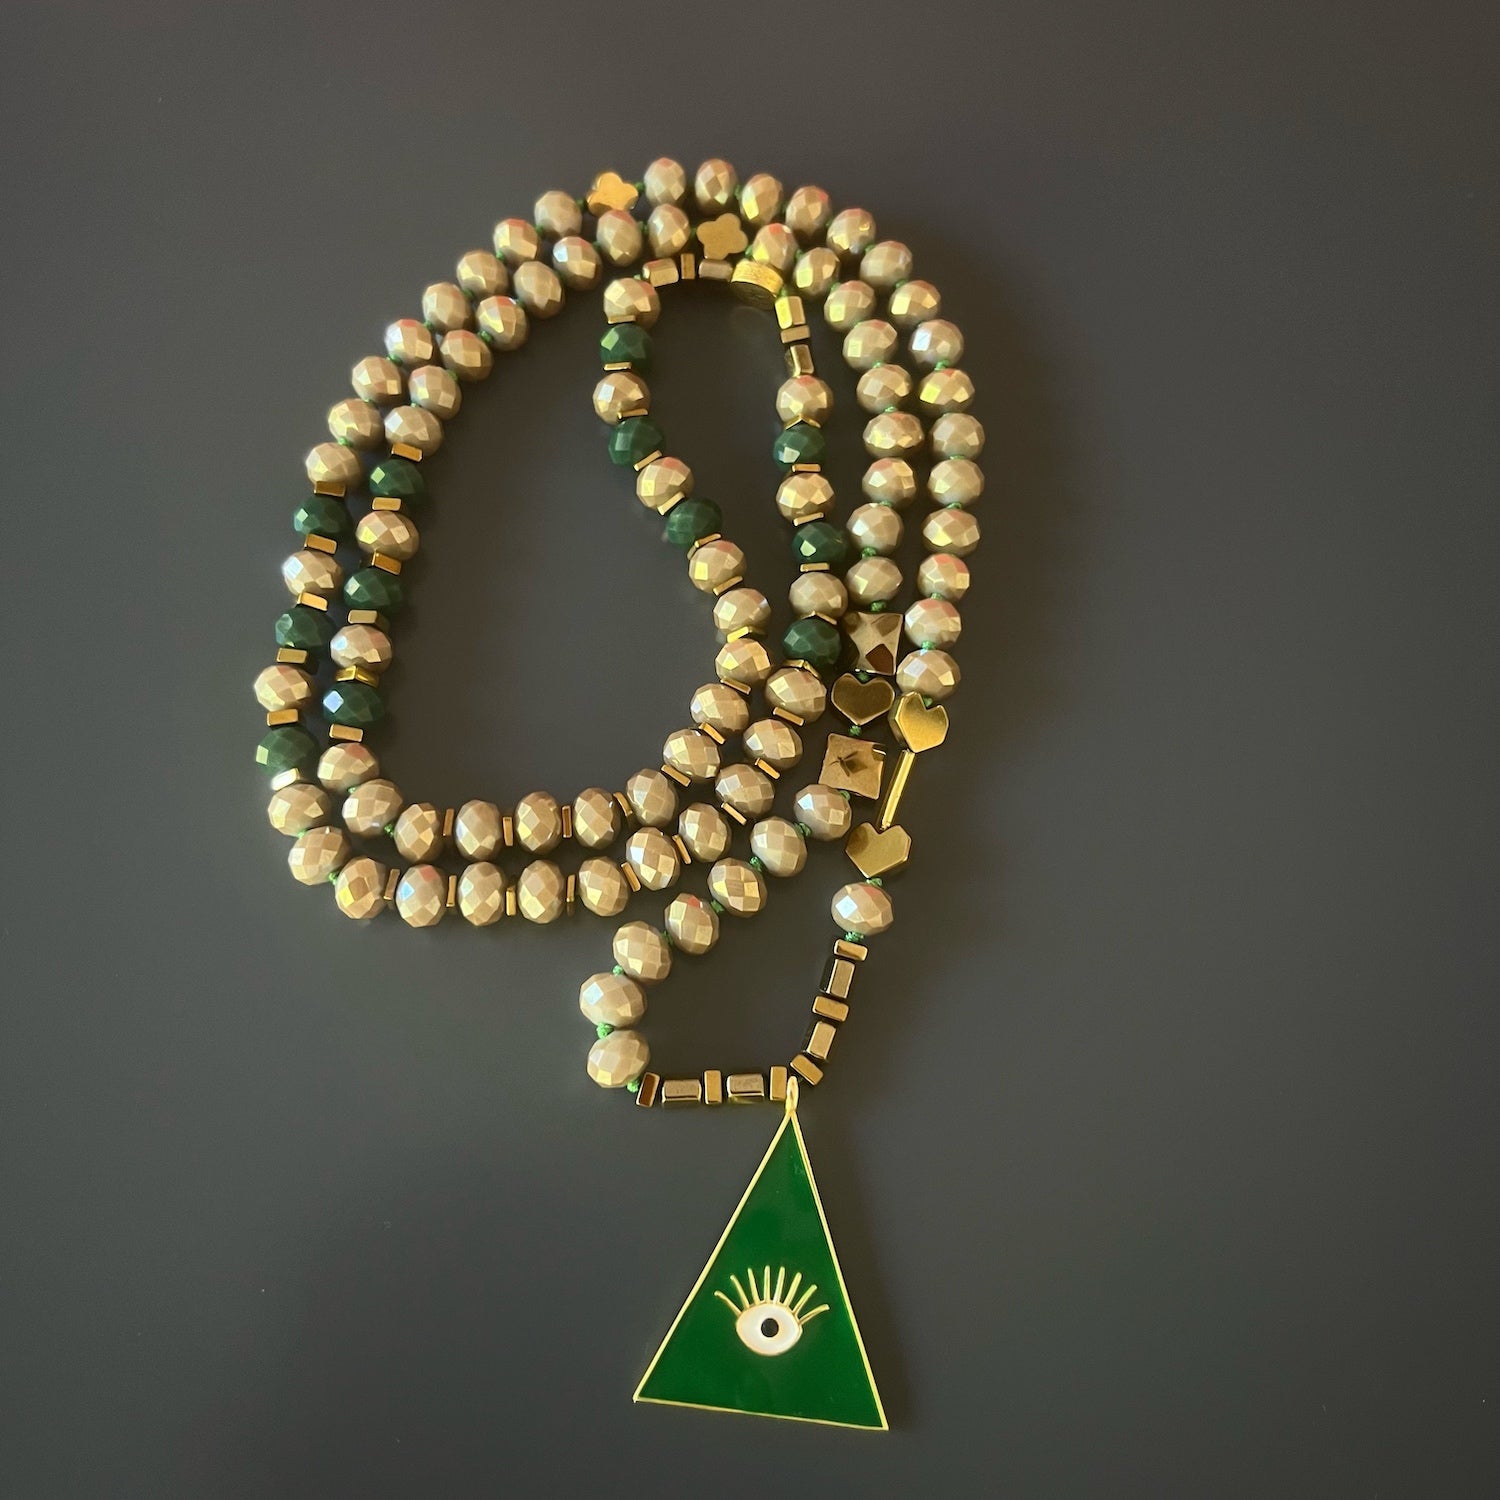 The Green Evil Eye Unique Necklace, elegantly draped around the neck, showcases the harmony of green and beige crystal beads, gold hematite stone heart shape beads, and Alhambra flower beads. 